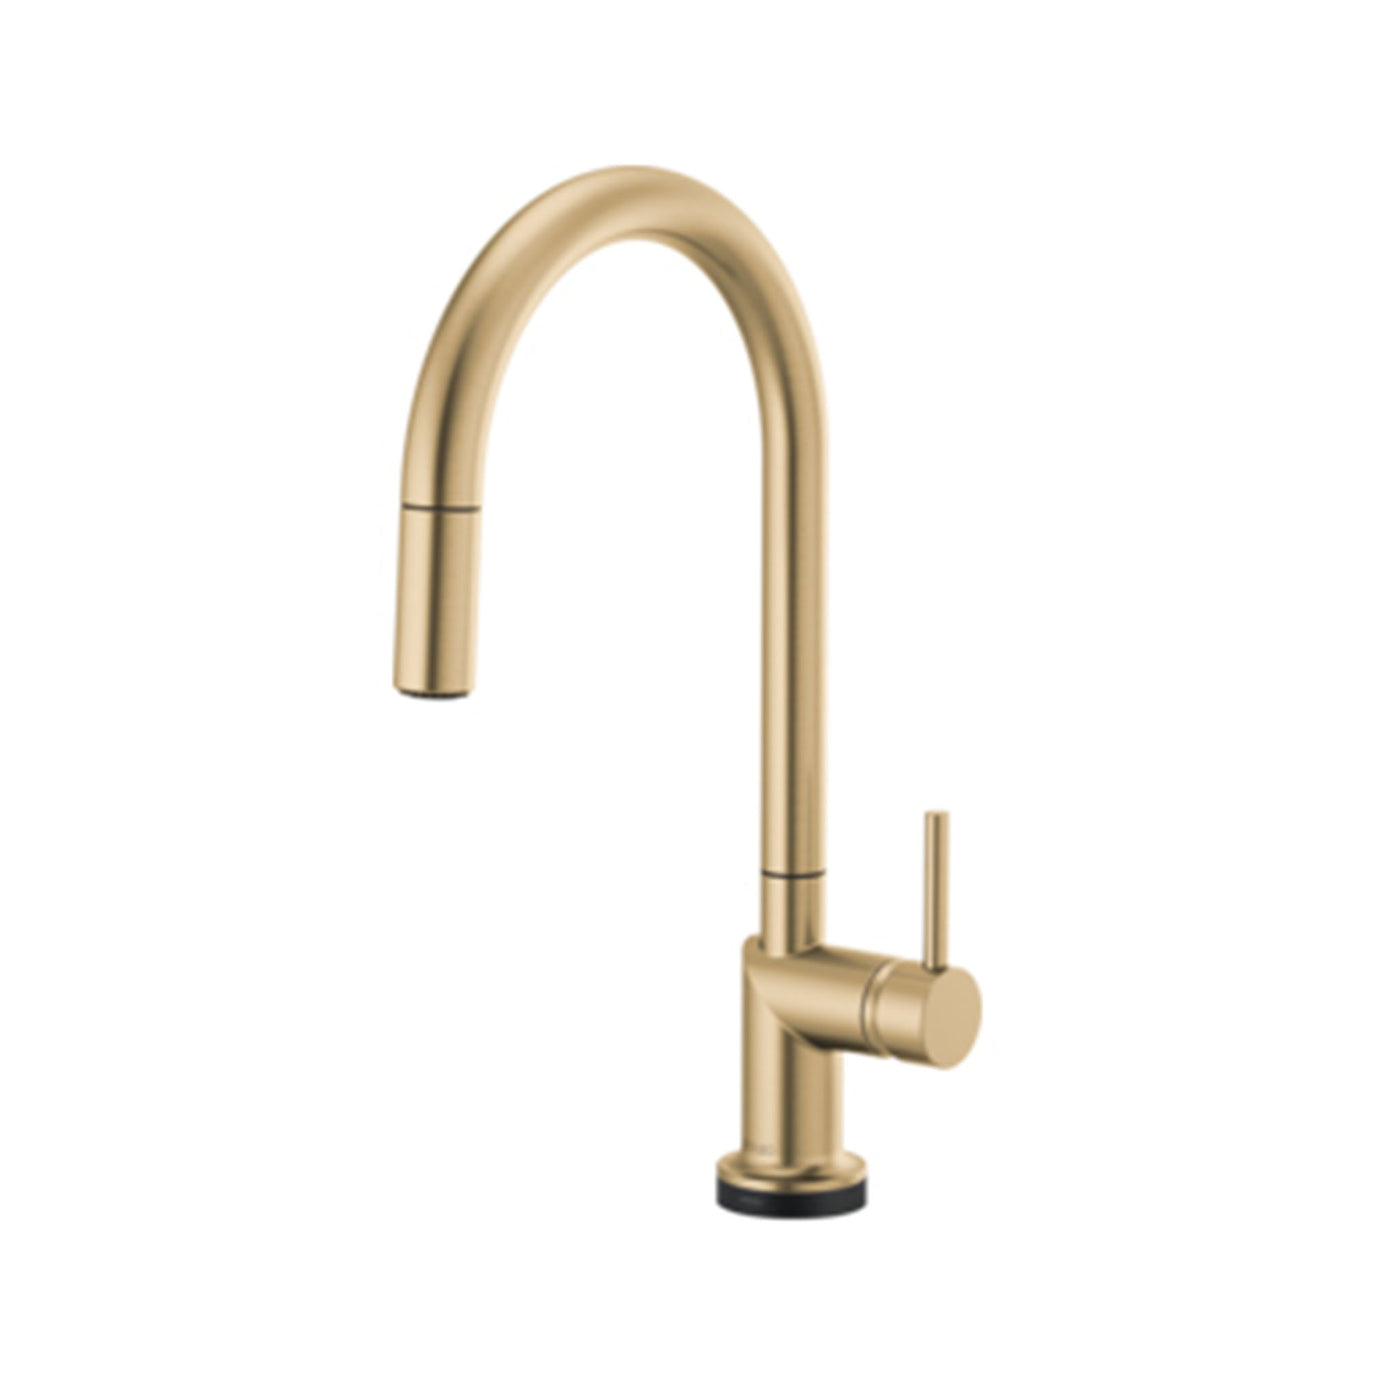 Odin® SmartTouch® Pull-Down Kitchen Faucet with Arc Spout - Less Handle